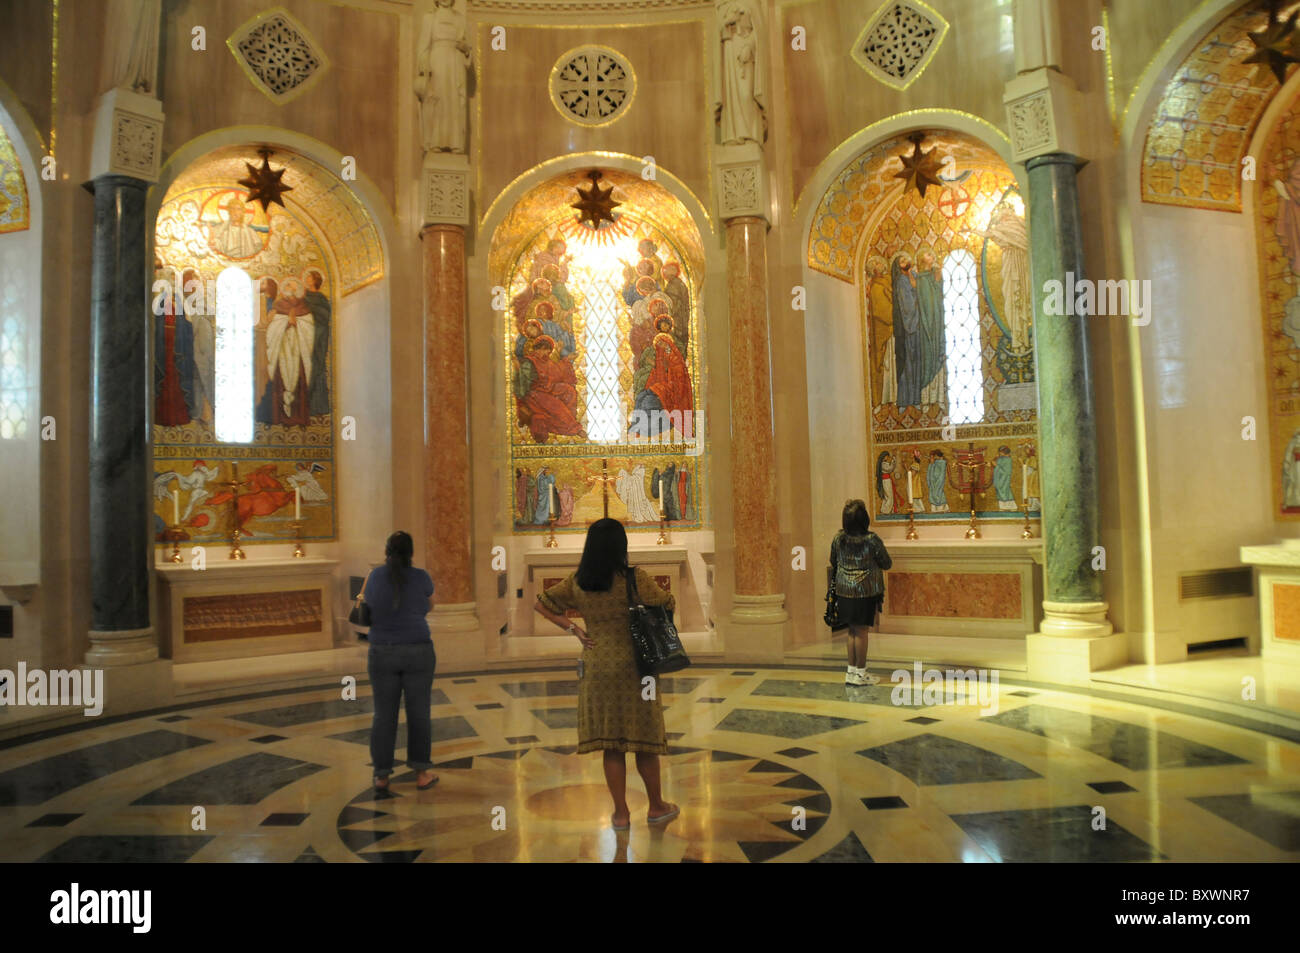 Interior of the Shrine of the Immaculate Conception in Washington, DCh Stock Photo